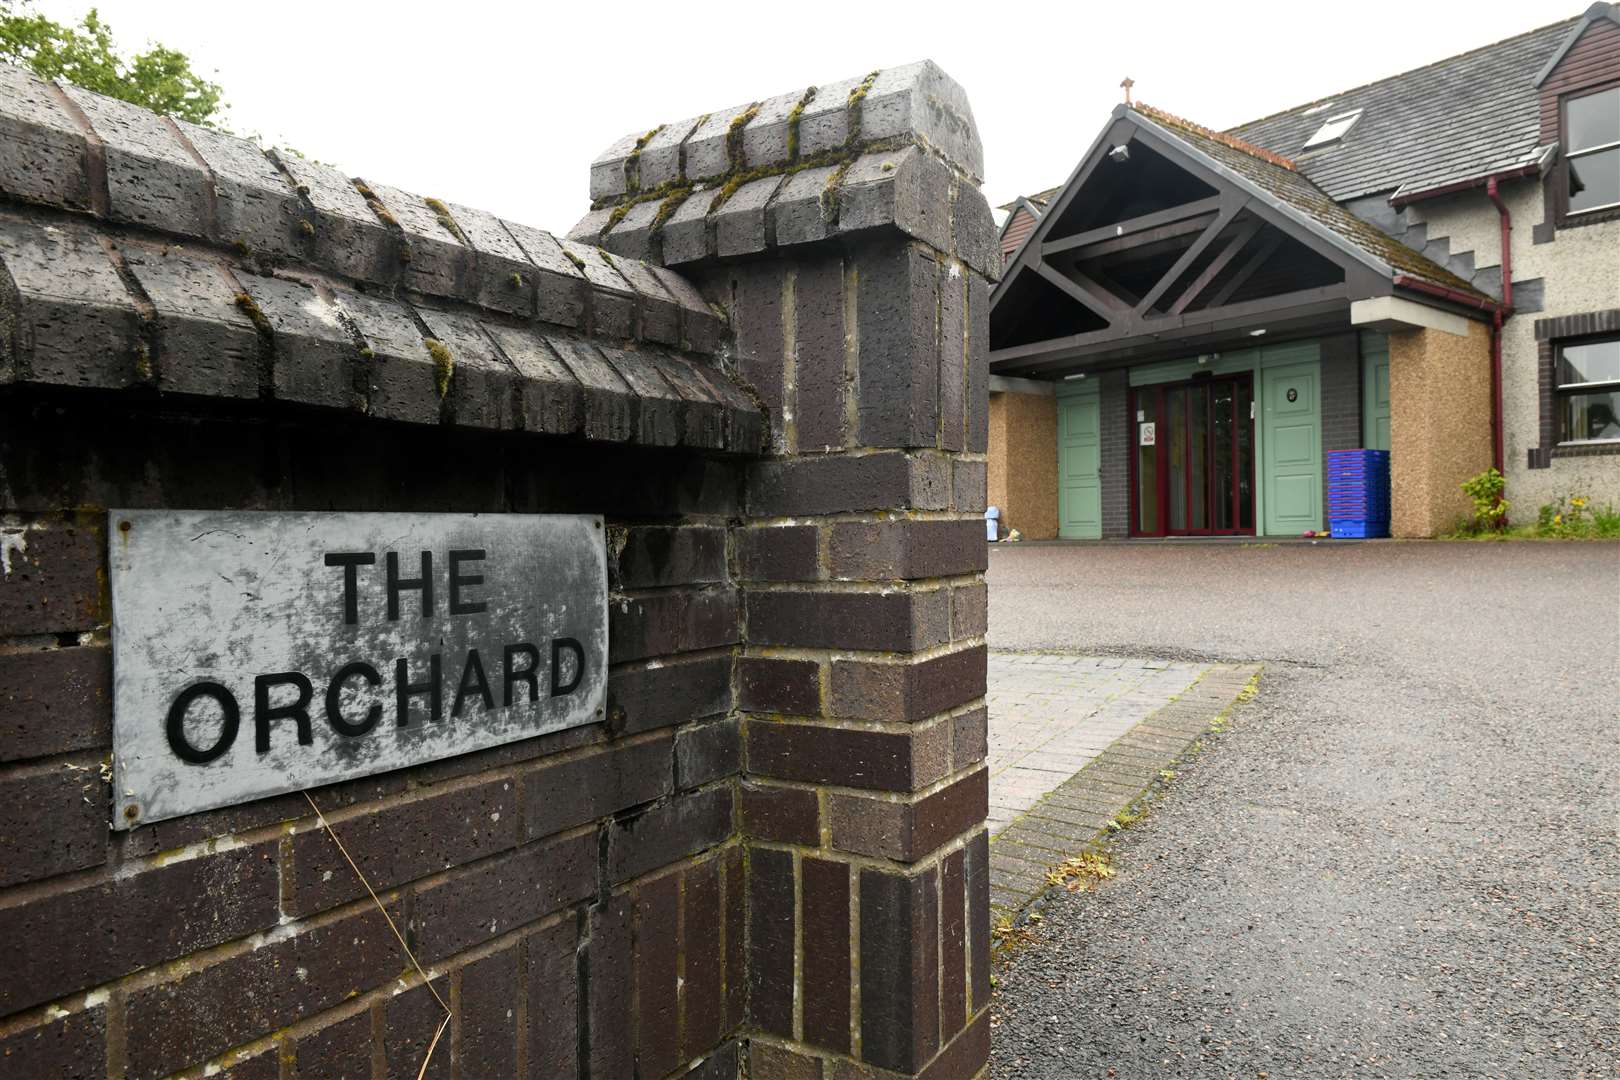 Respite care has been paused at The Orchard.